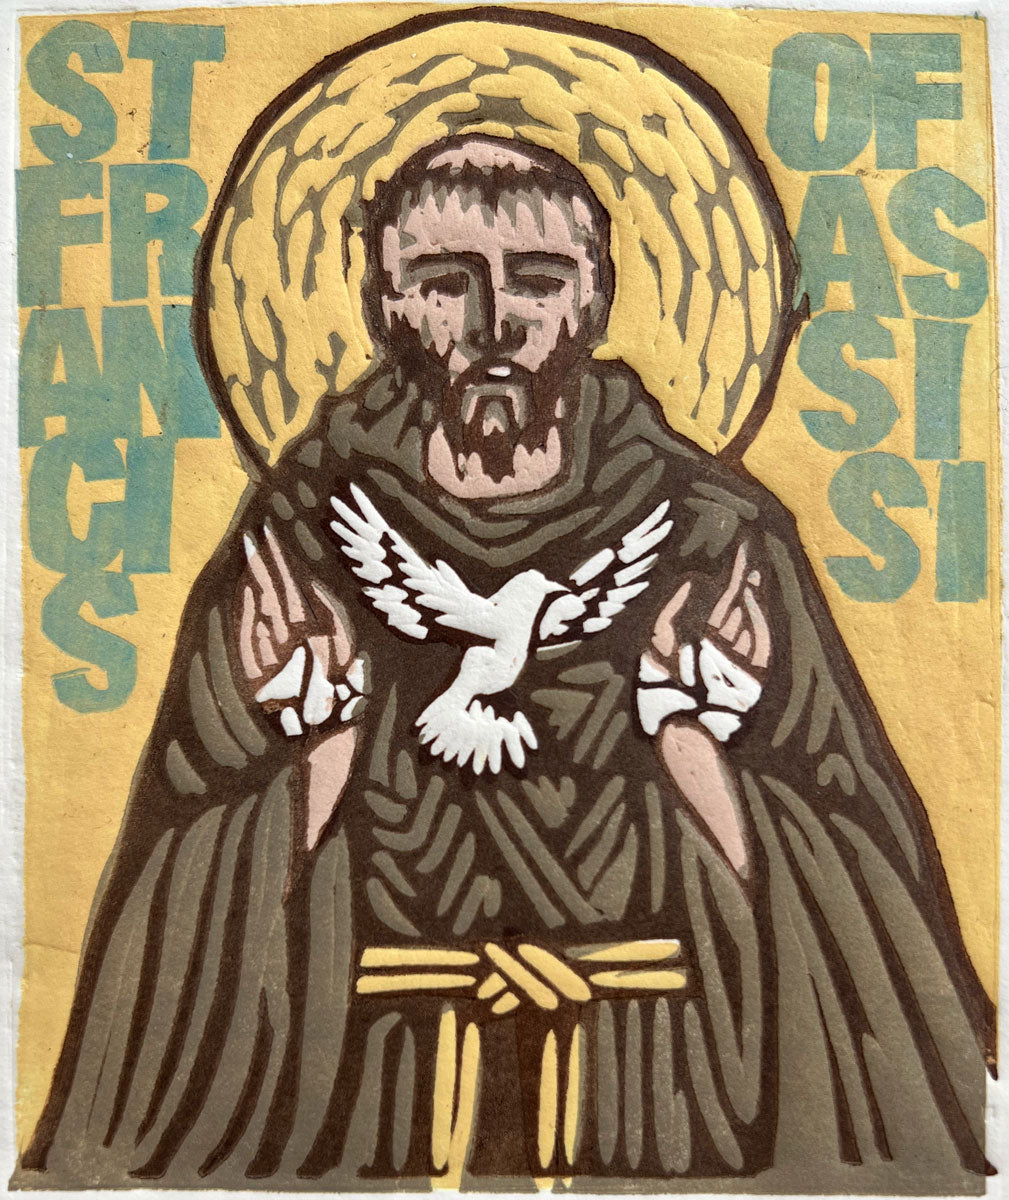 213. St. Francis of Assisi